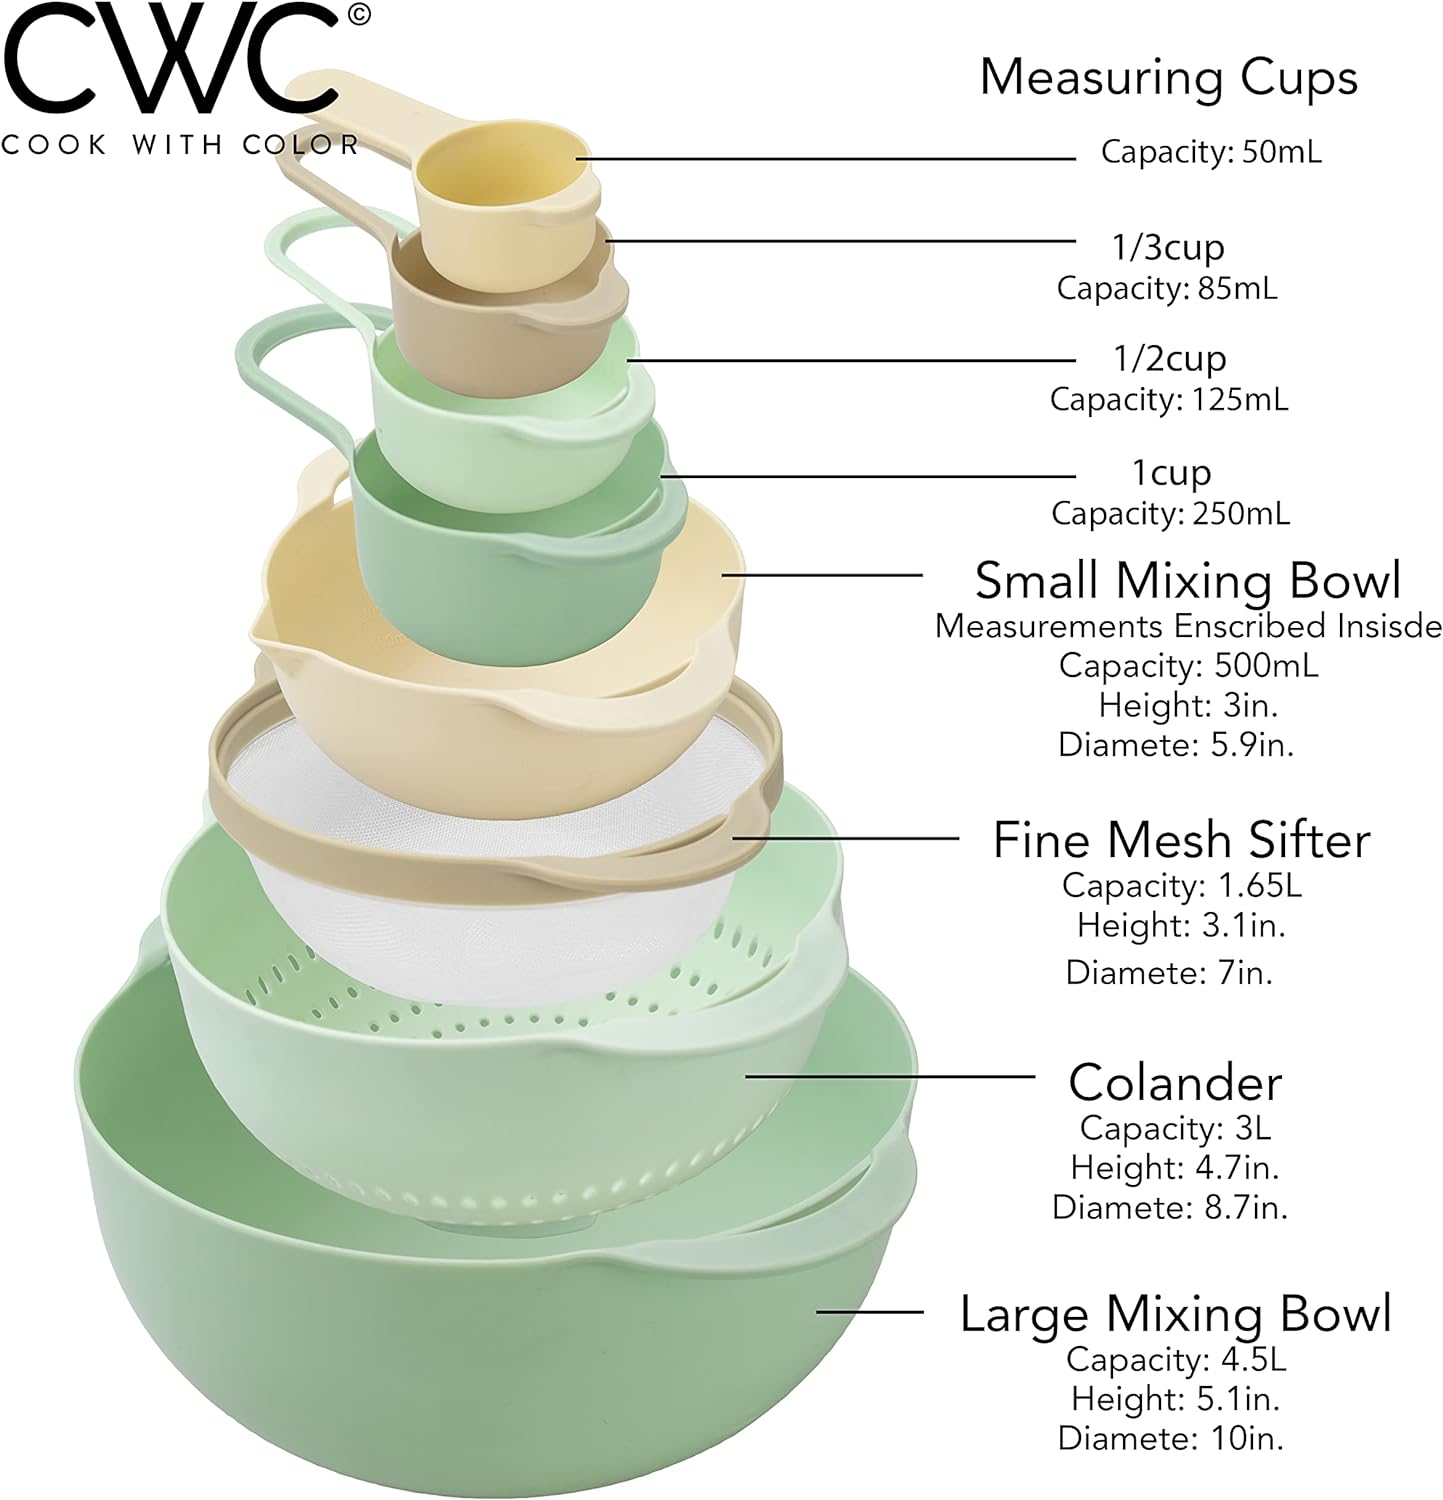 COLORFUL 8 Piece Nesting Bowls, Measuring Cups Colander and Sifter Set - Includes 2 Mixing Bowls, 1 Colander, 1 Sifter and 4 Measuring Cups,Mint Green